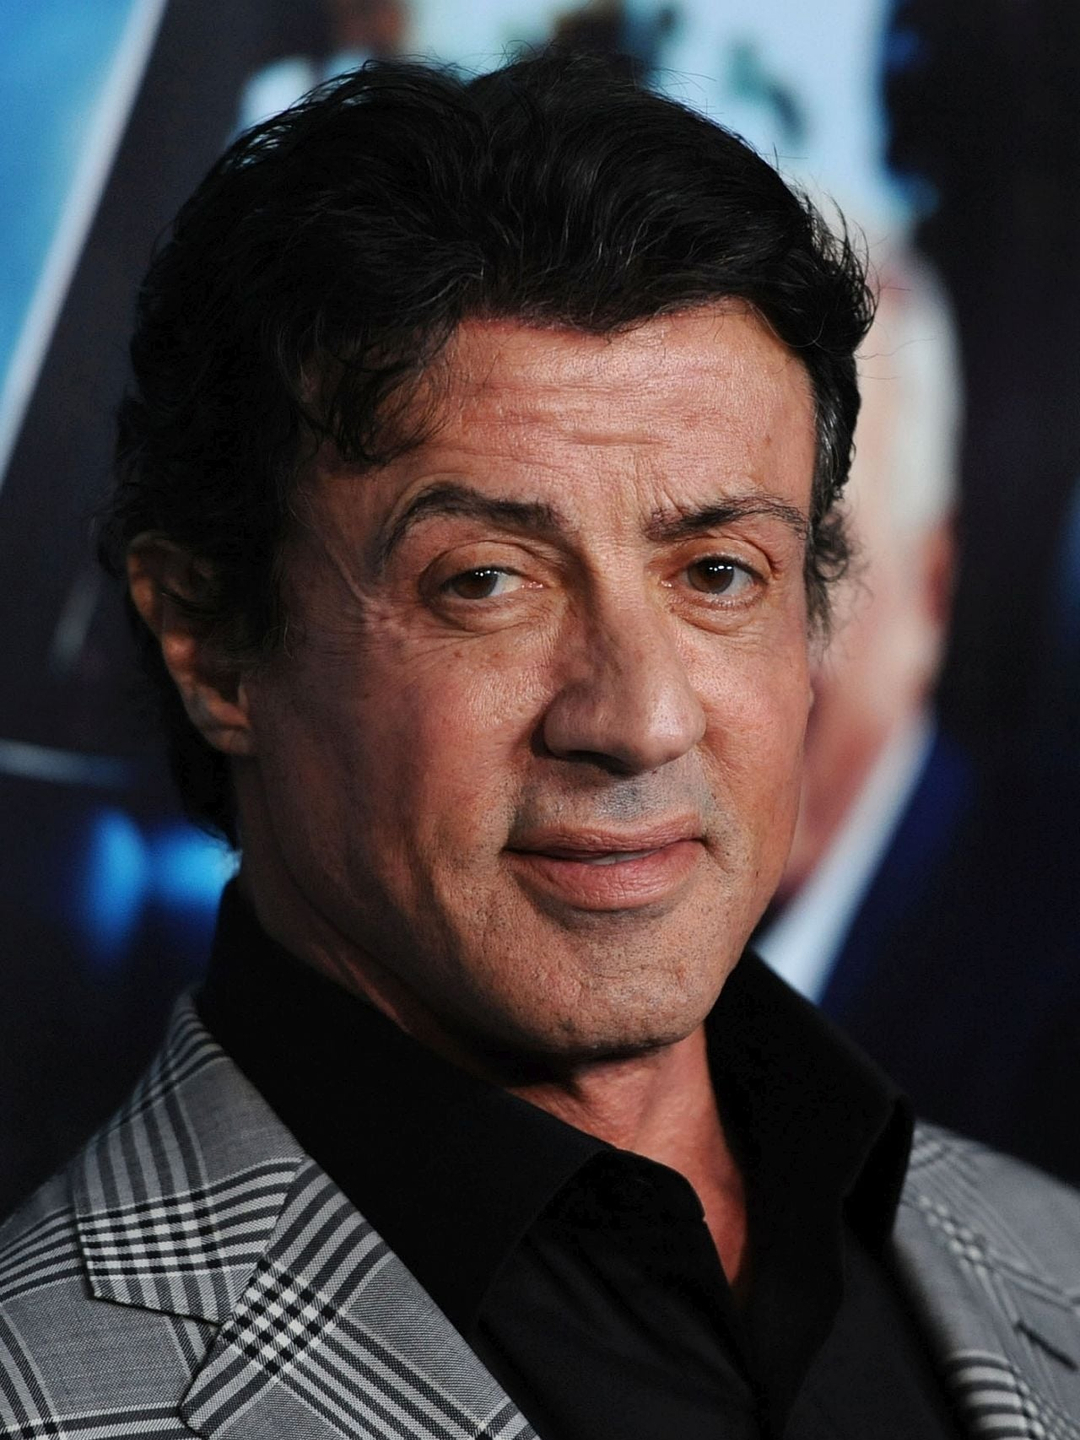 Sylvester Stallone personal traits